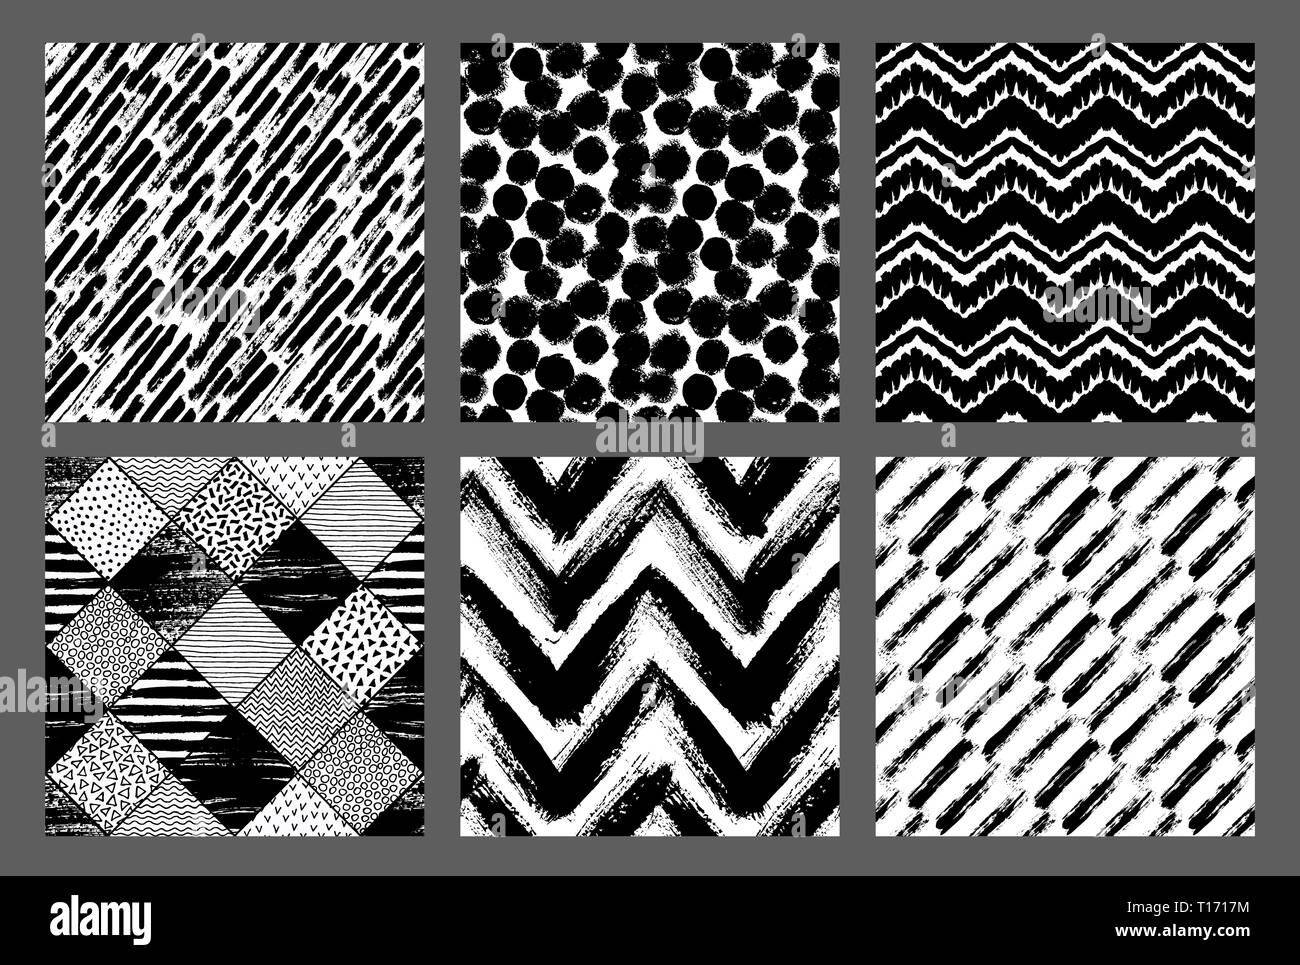 Painted Patterns Hand Drawn Backgrounds Dots Stripes Chevron Stock Vector